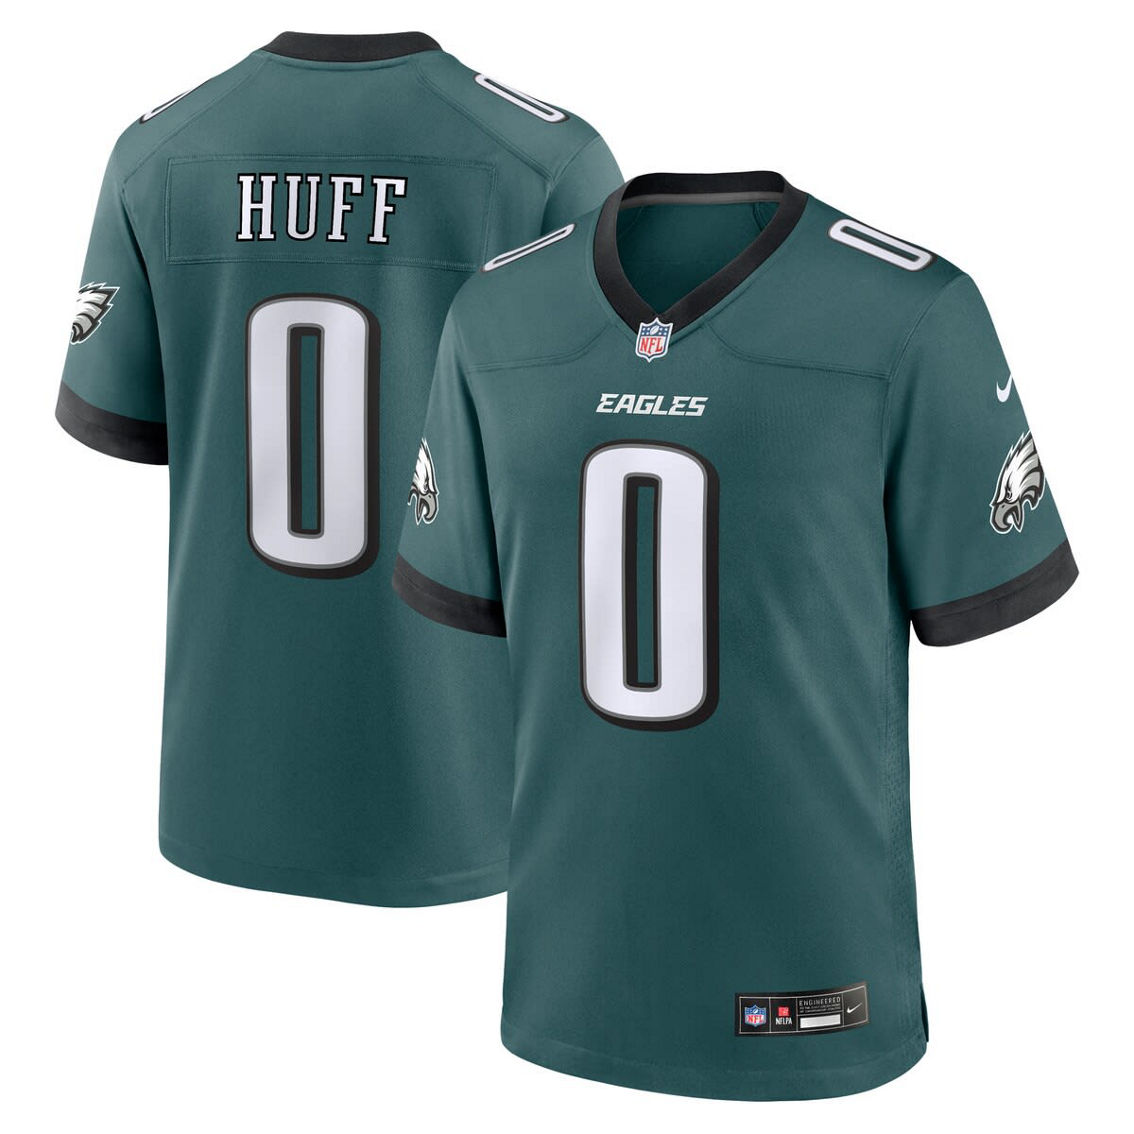 Nike Men's Bryce Huff Midnight Green Philadelphia Eagles Game Player Jersey - Image 2 of 4